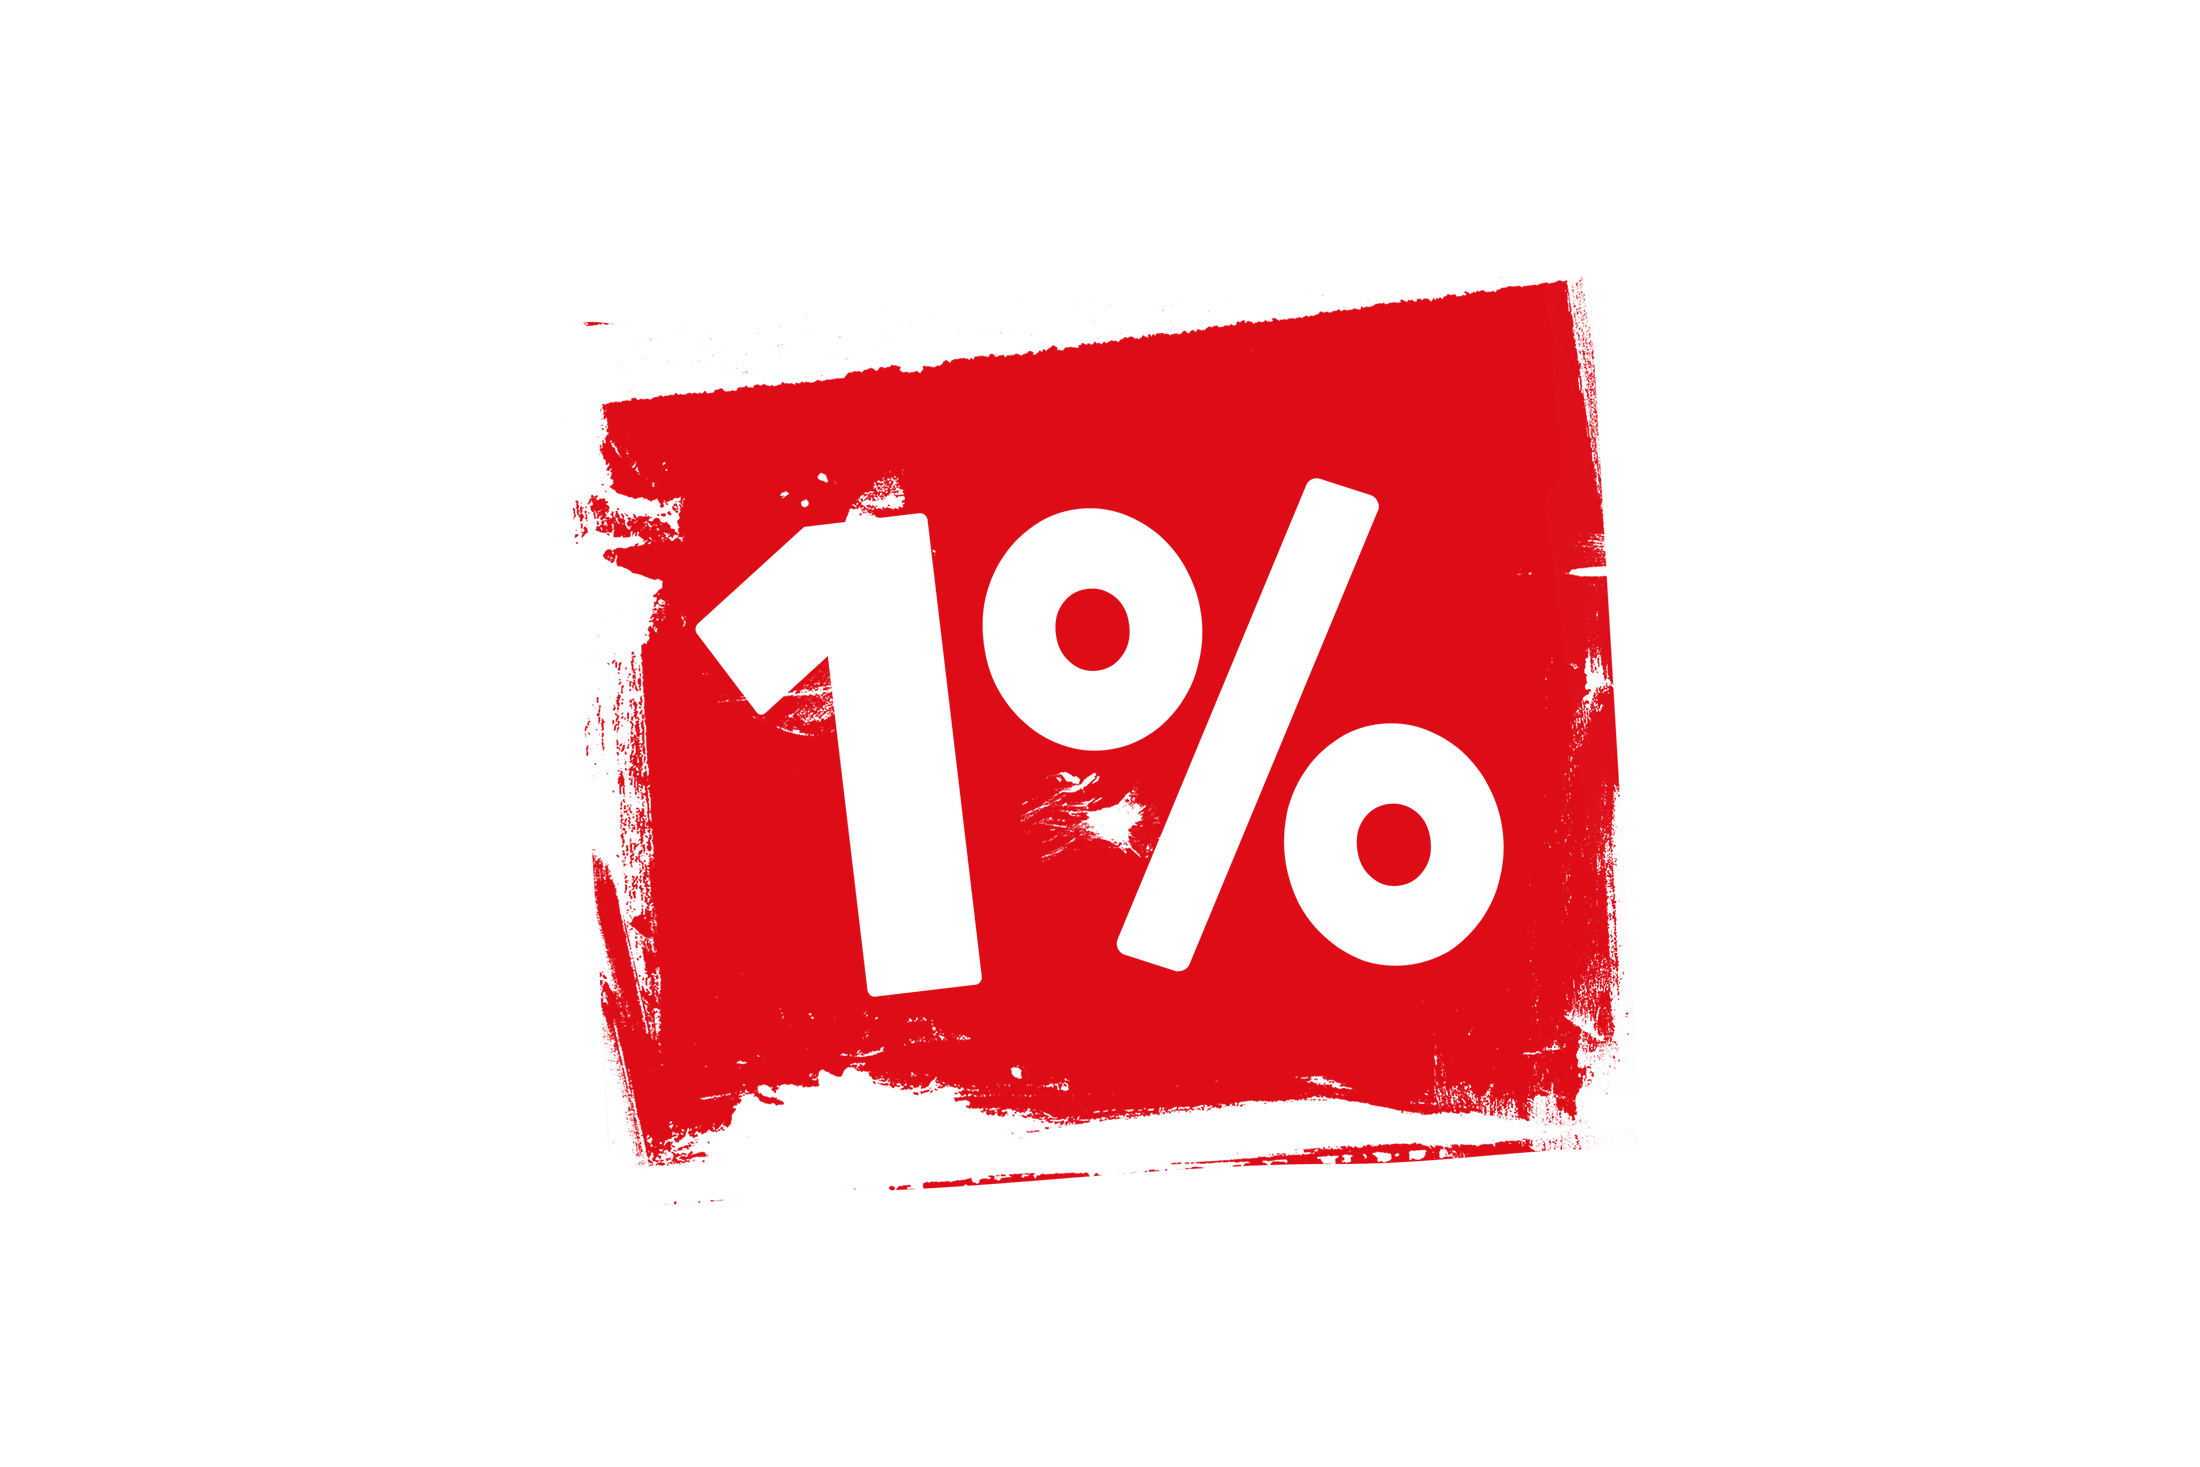 Grunge 1 percent label PNG and PSD